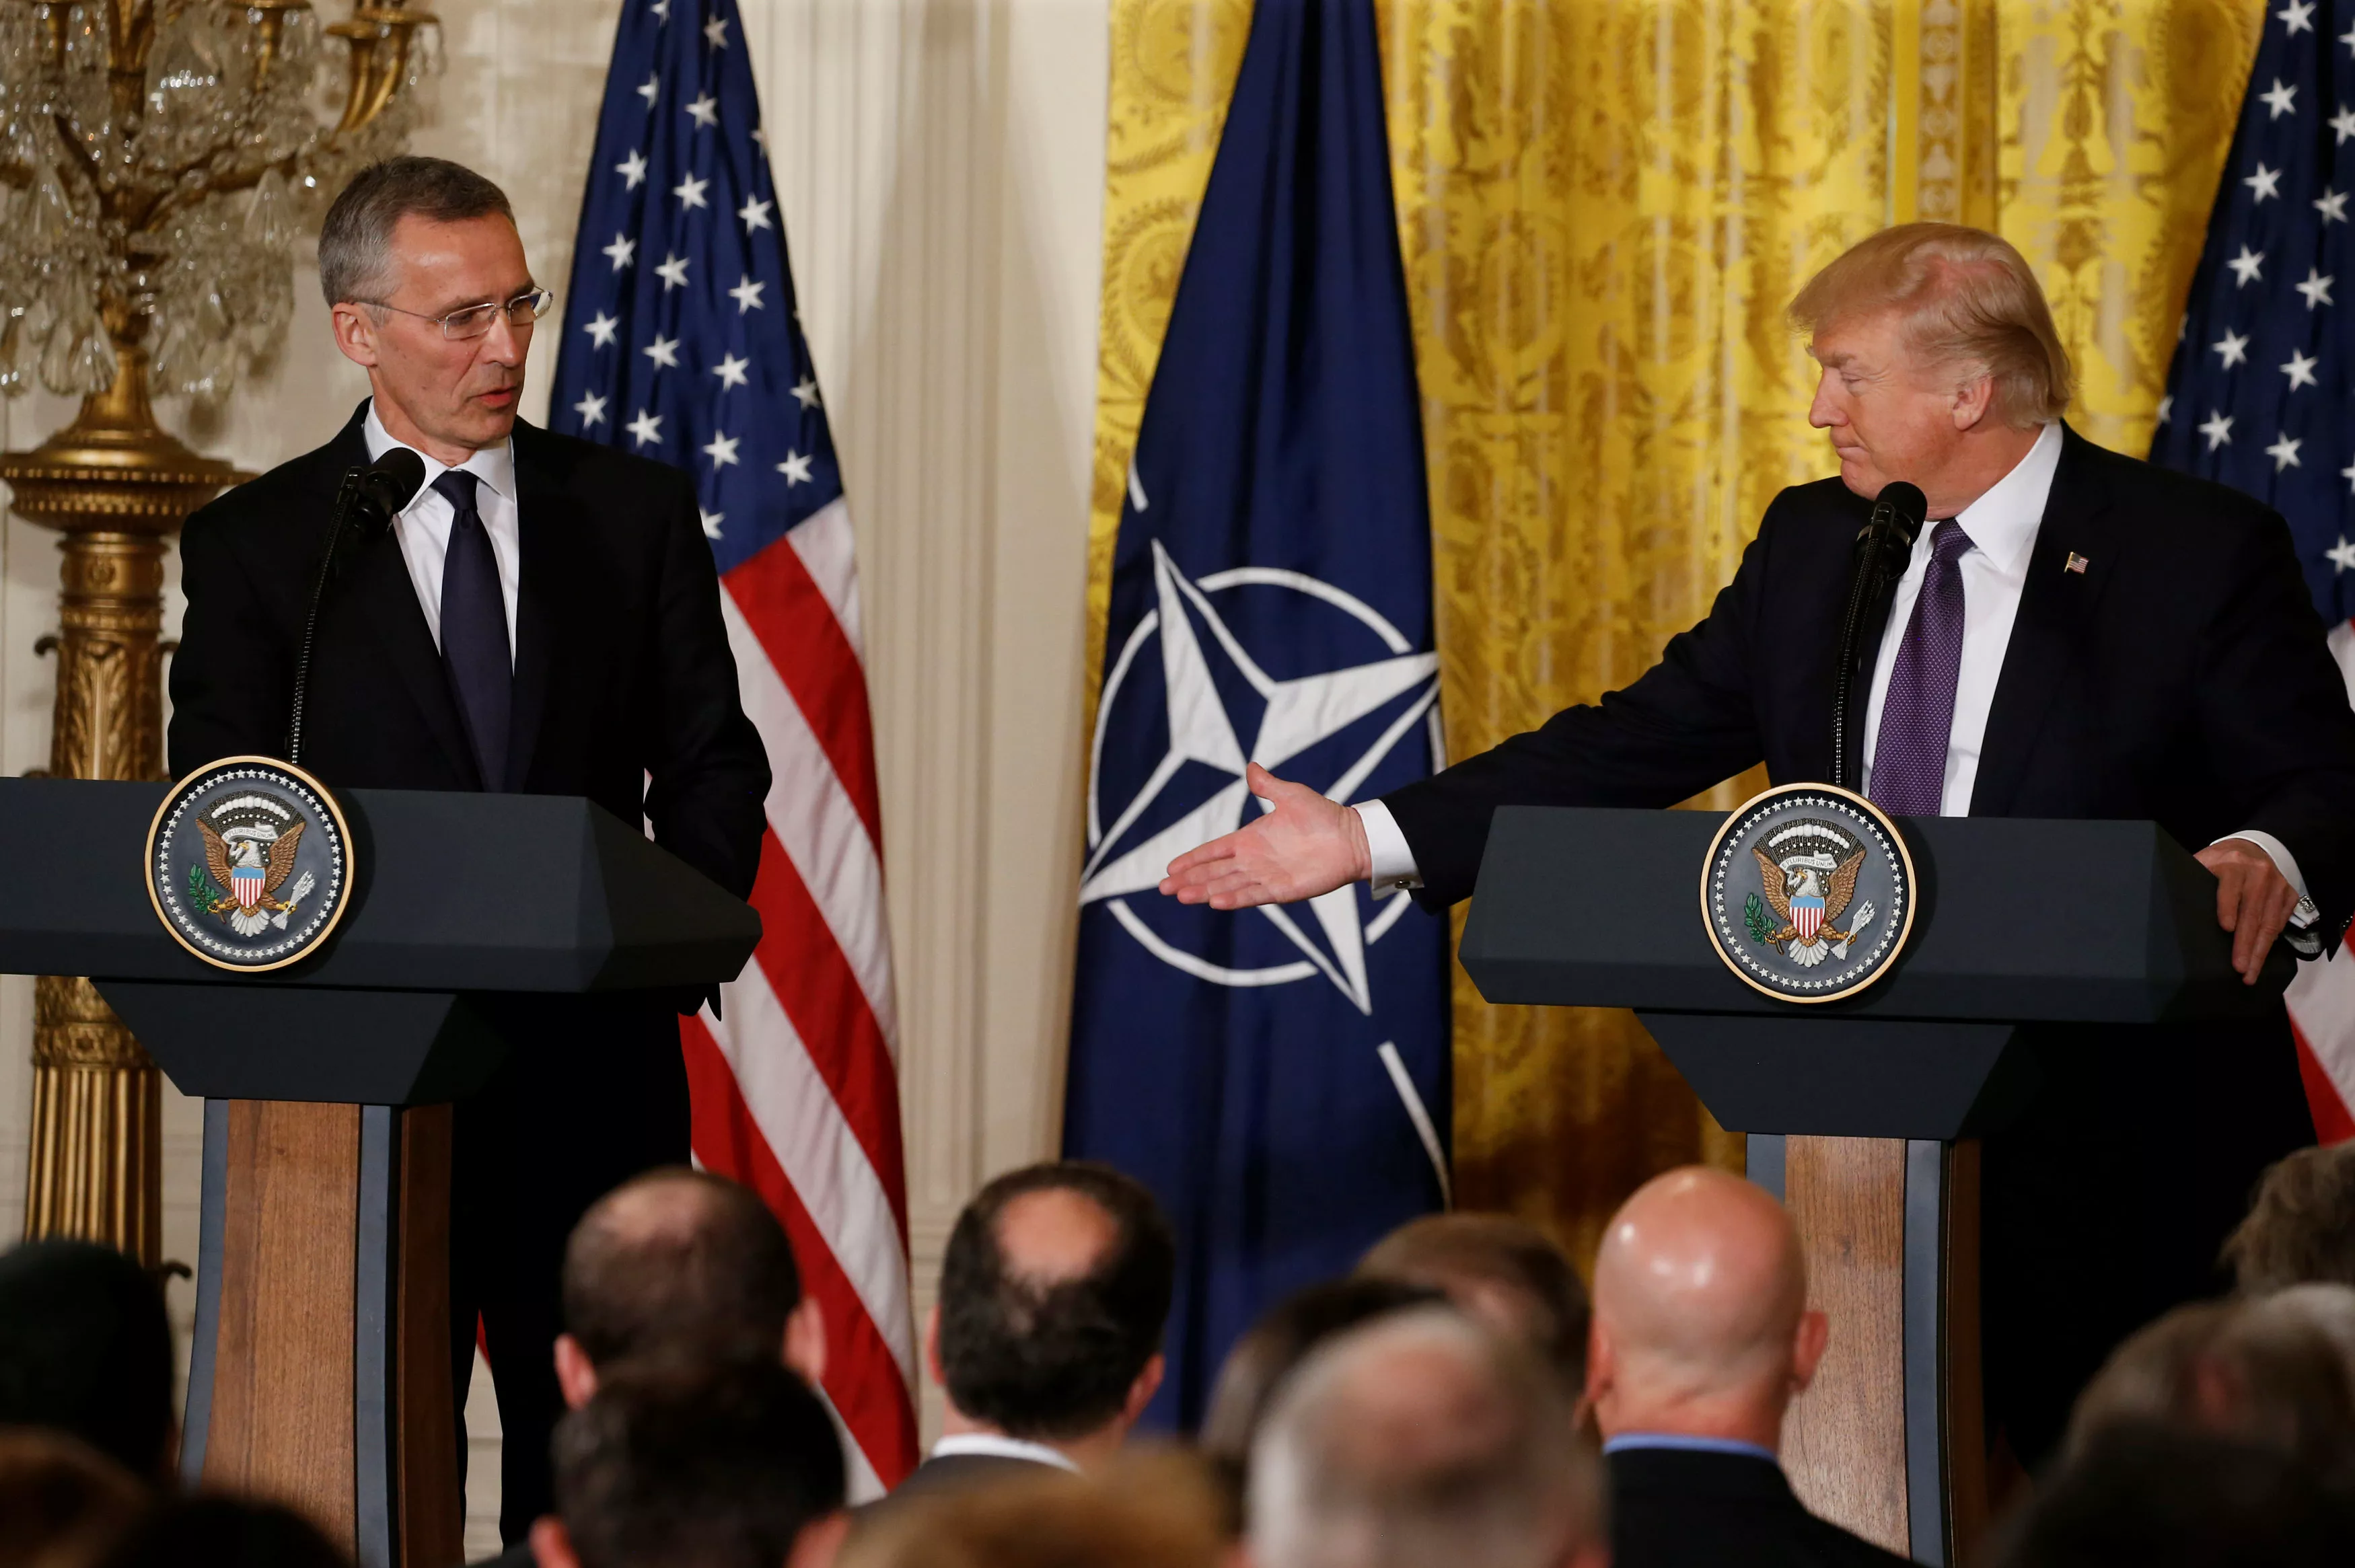 U.S. President Donald Trump (R) and NATO Secretary General Jens Stoltenberg hold a joint news conference in the East Room at the White House in Washington, U.S., April 12, 2017.